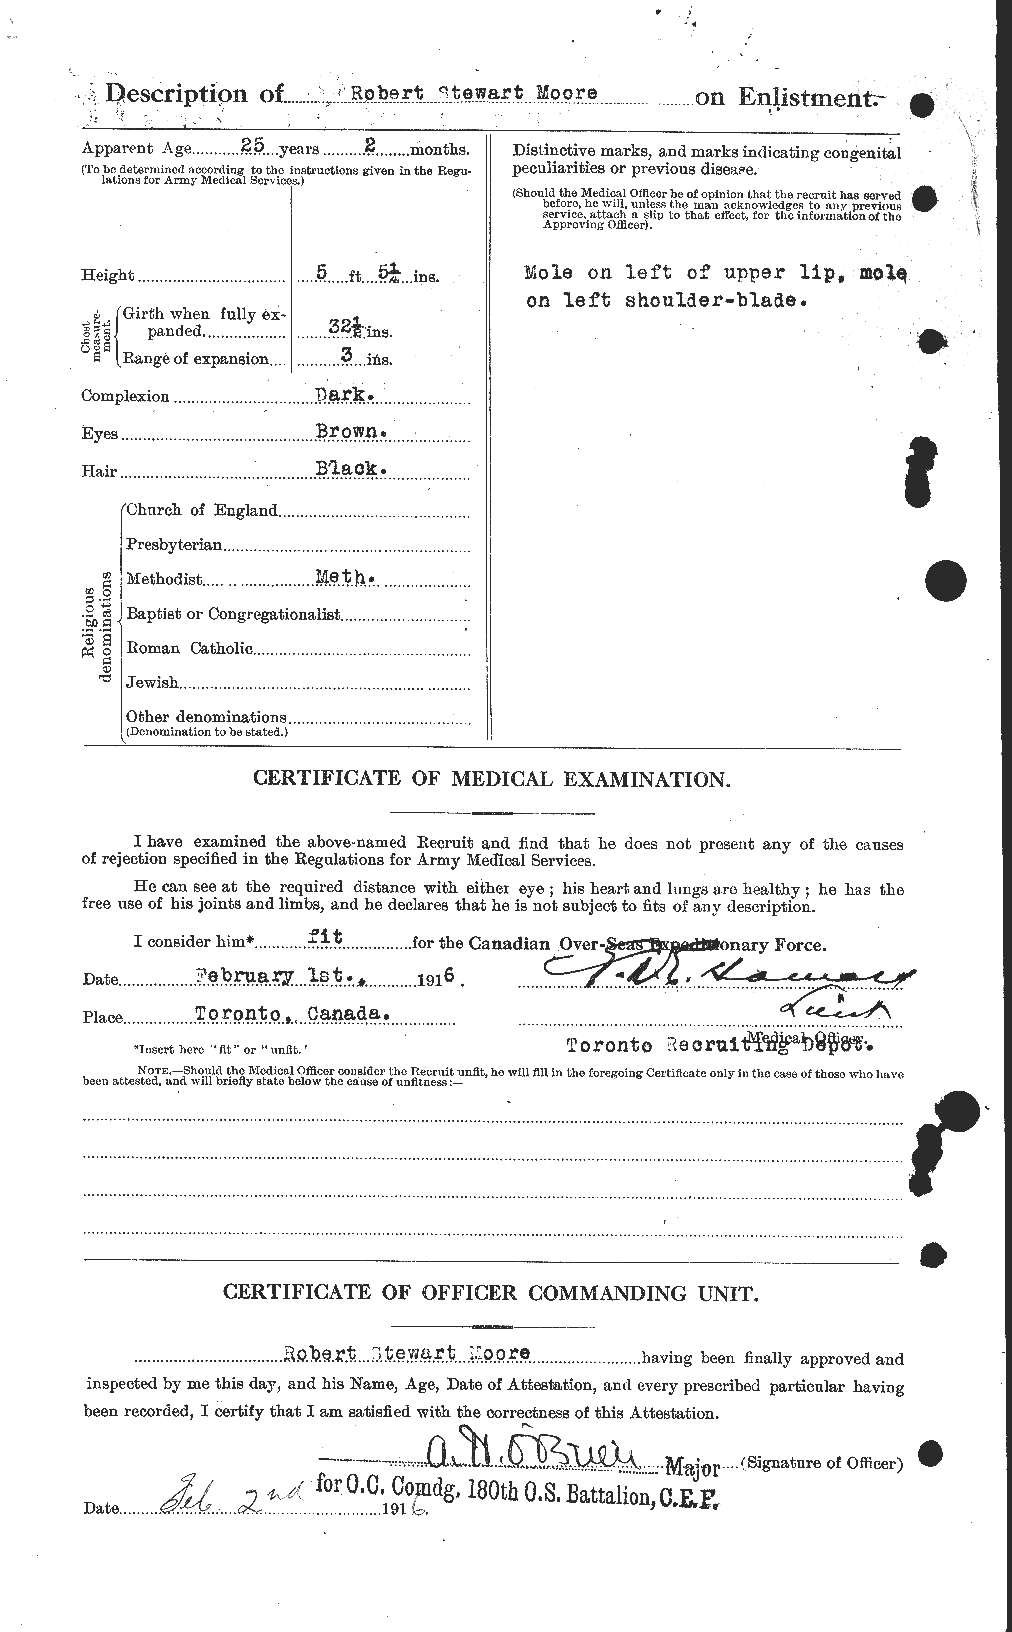 Personnel Records of the First World War - CEF 503583b